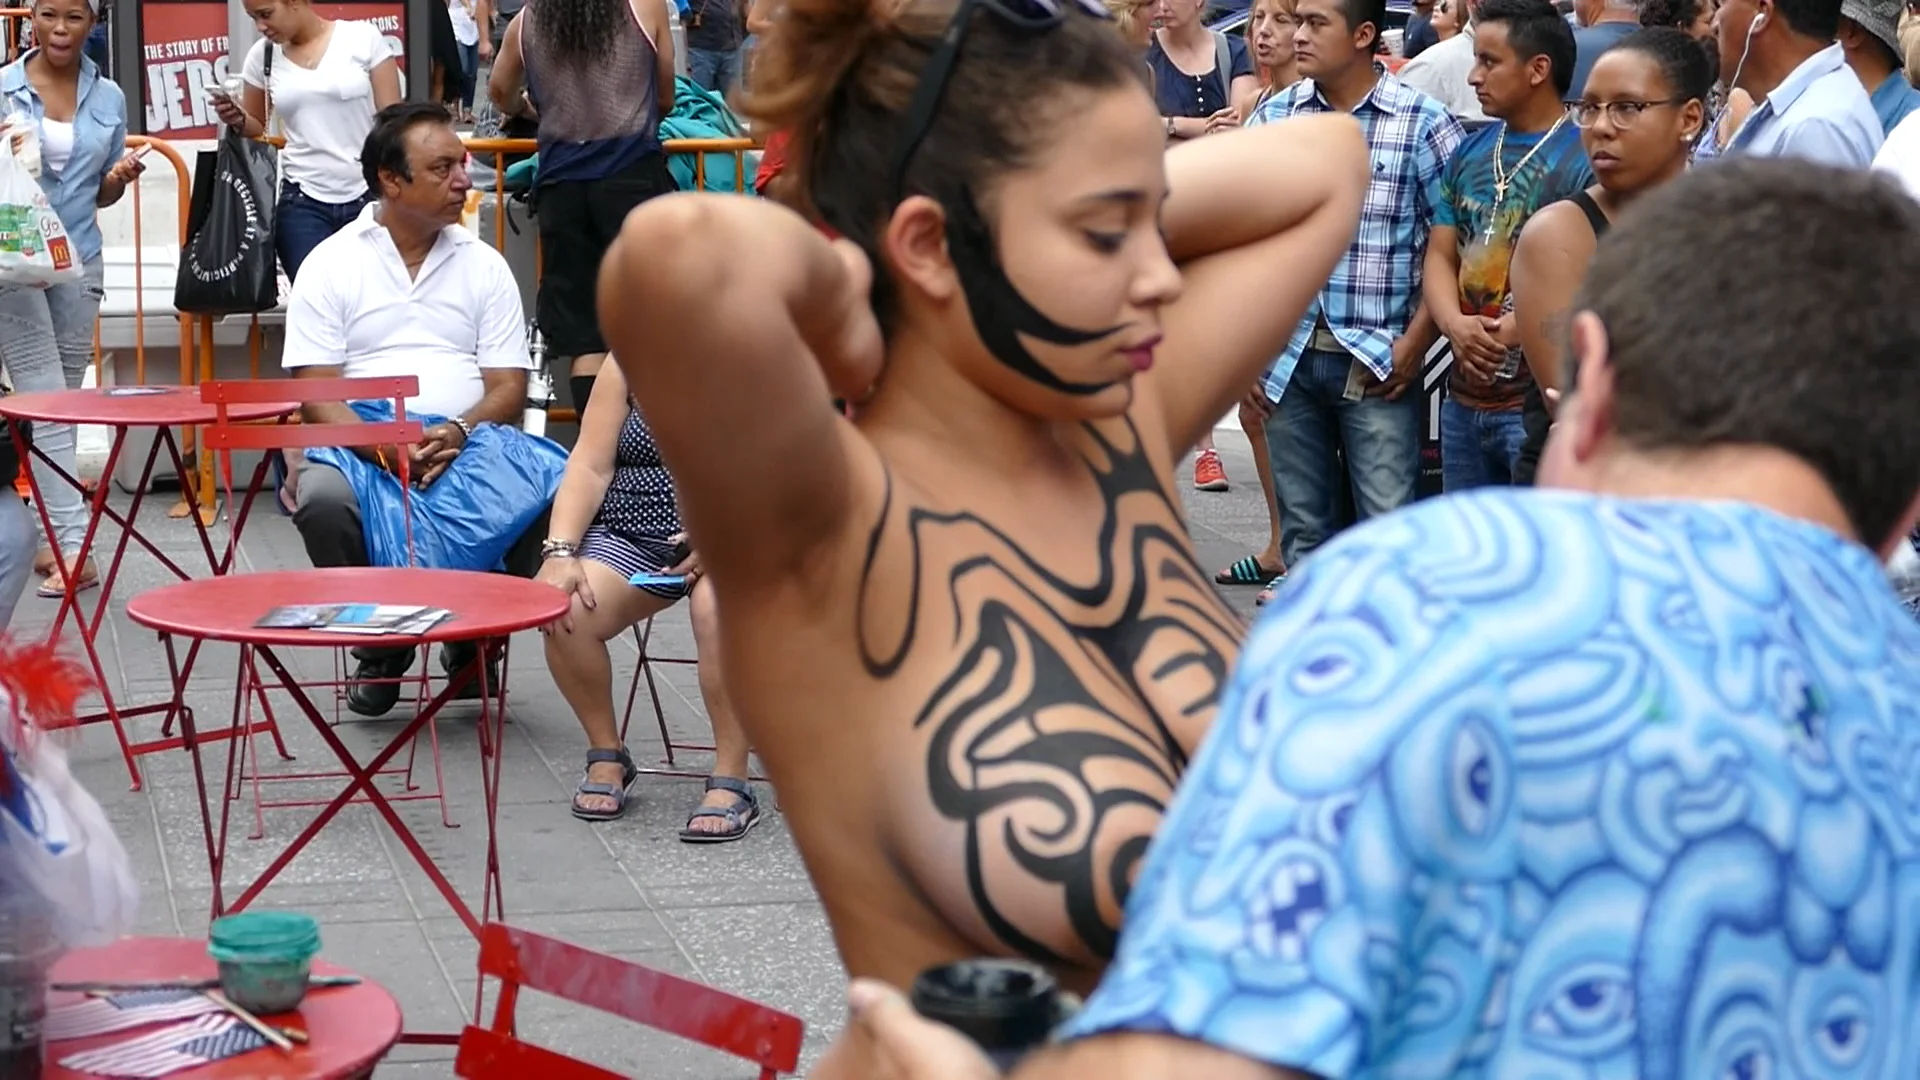 carly olson recommends body painting nyc times square pic